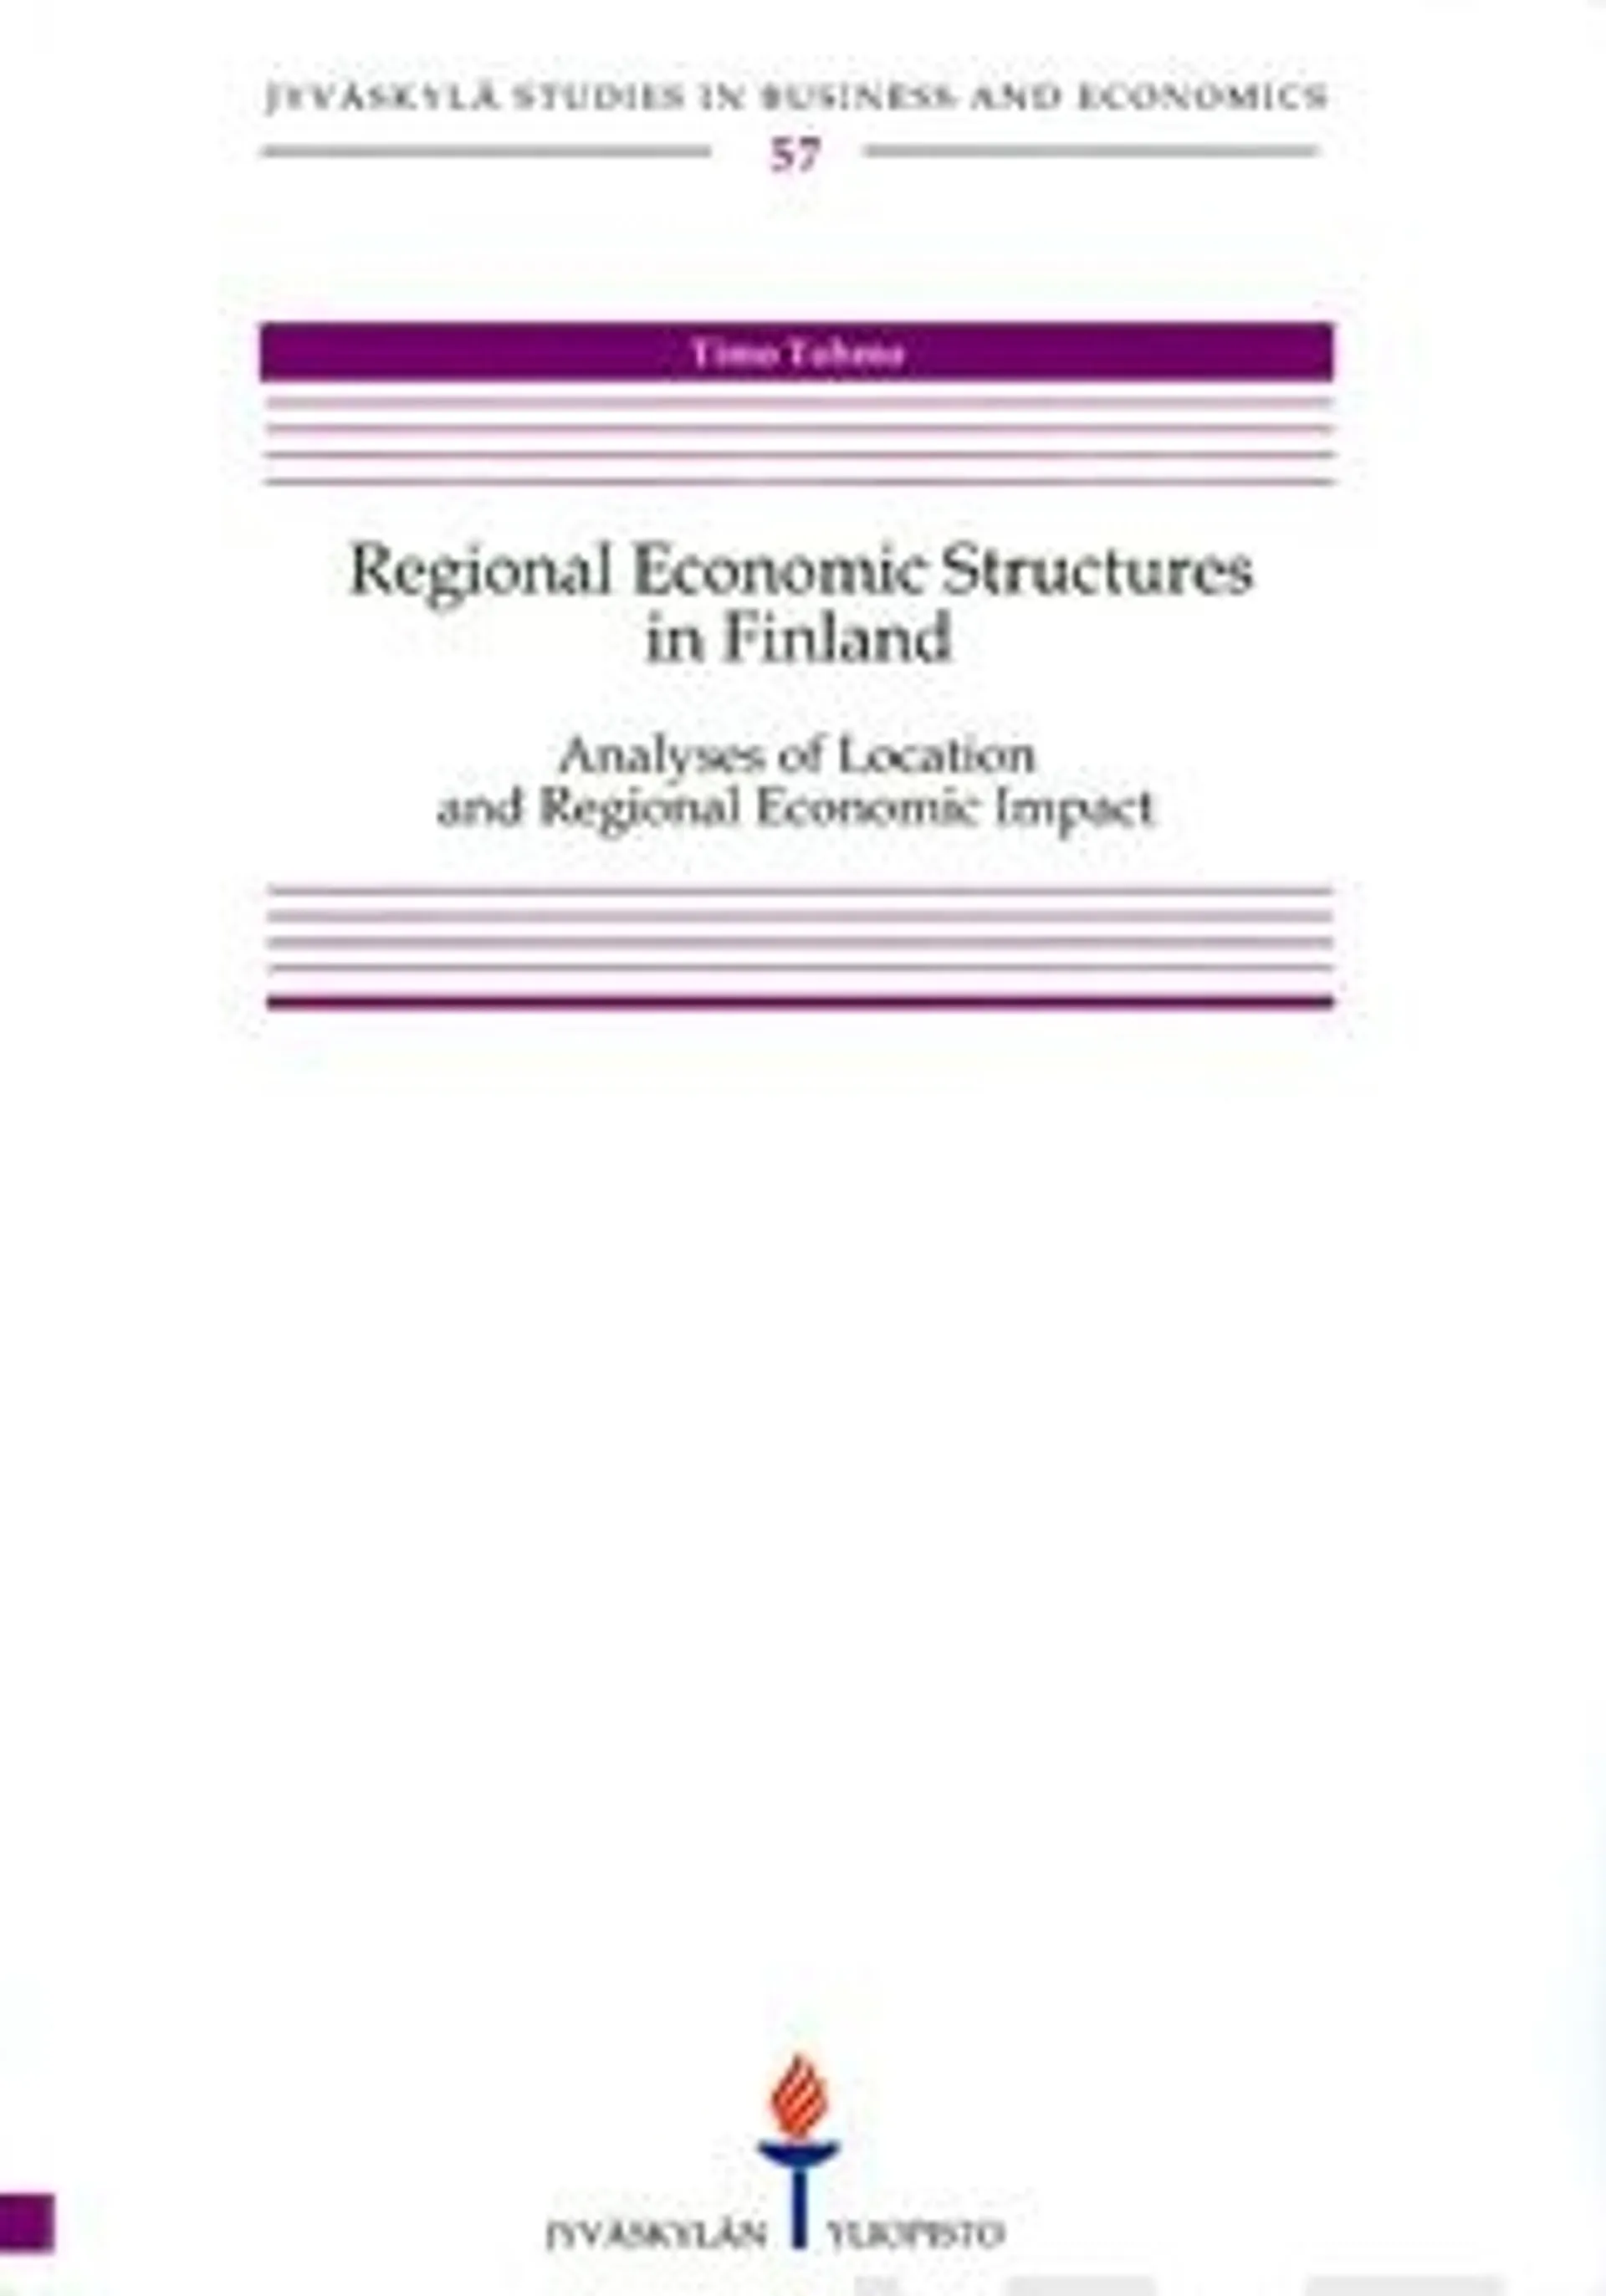 Tohmo, Regional economic structures in Finland analyses of location and regionaleconomic impact